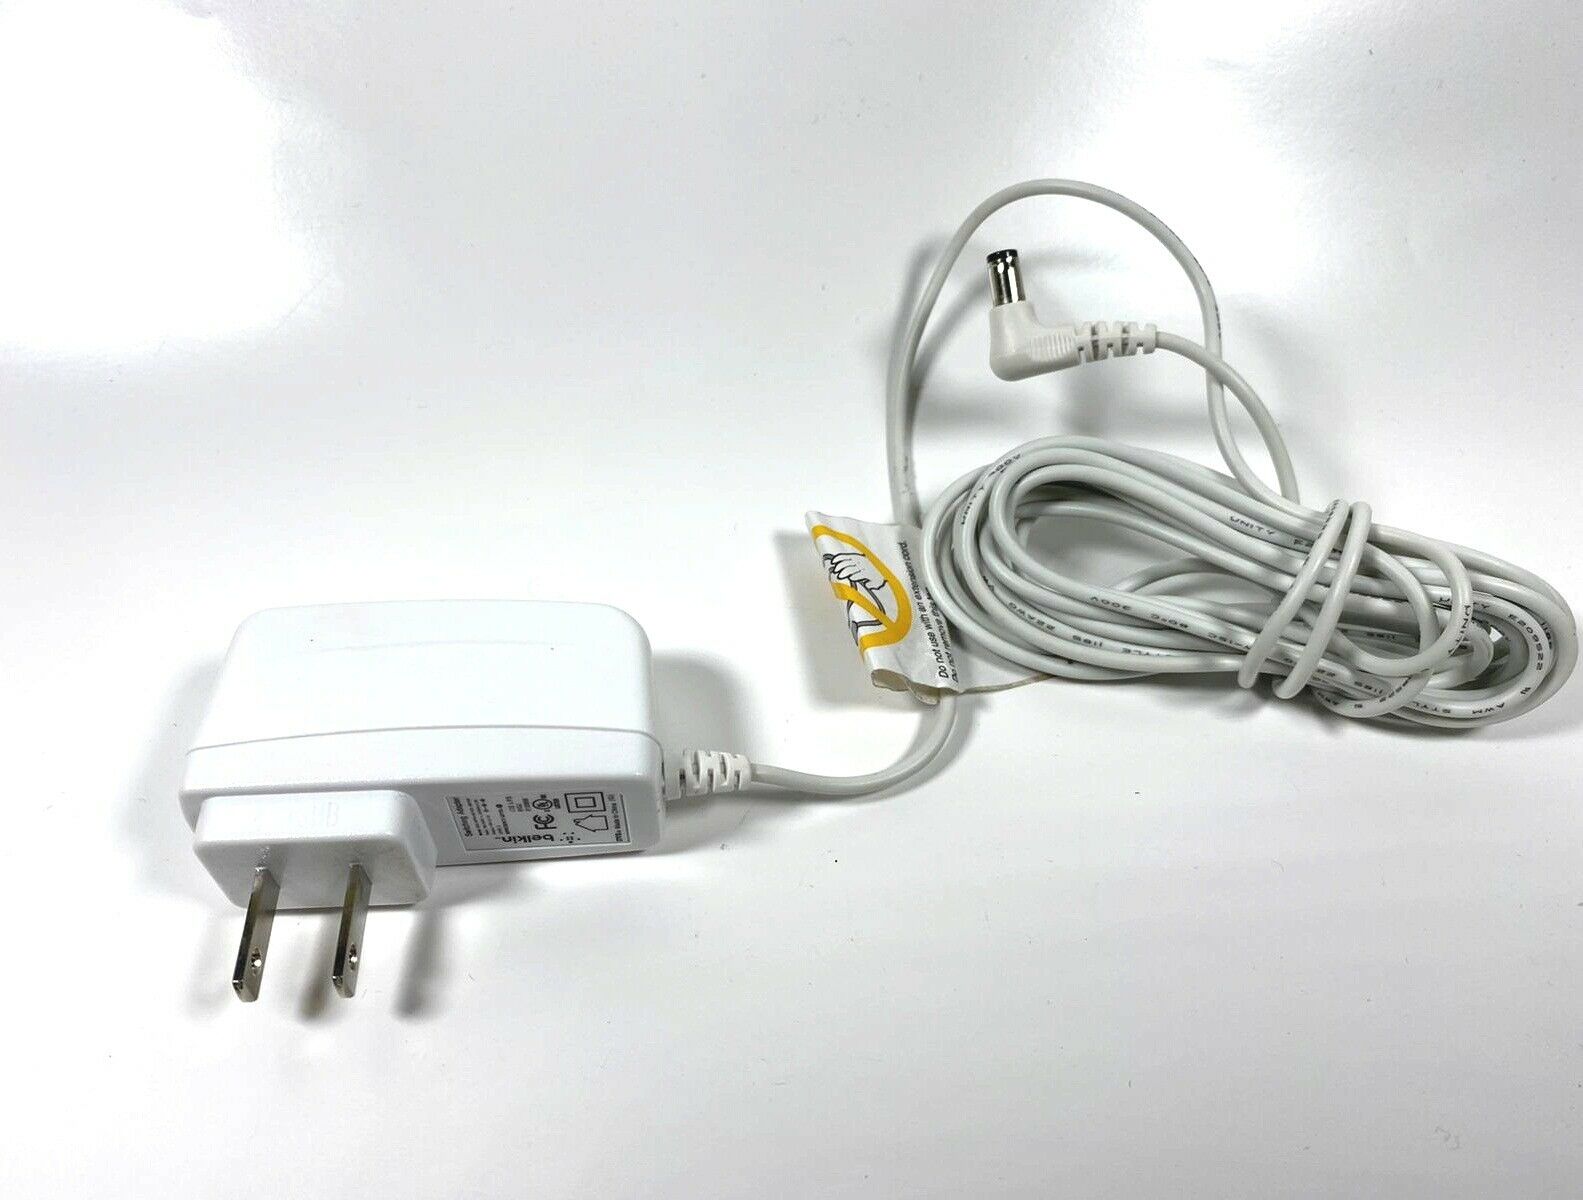 Belkin Switching Adapter Charger DSC-6PFA-05 Brand: Belkin MPN: Does Not Apply Color: White Compatible Brand: Uni